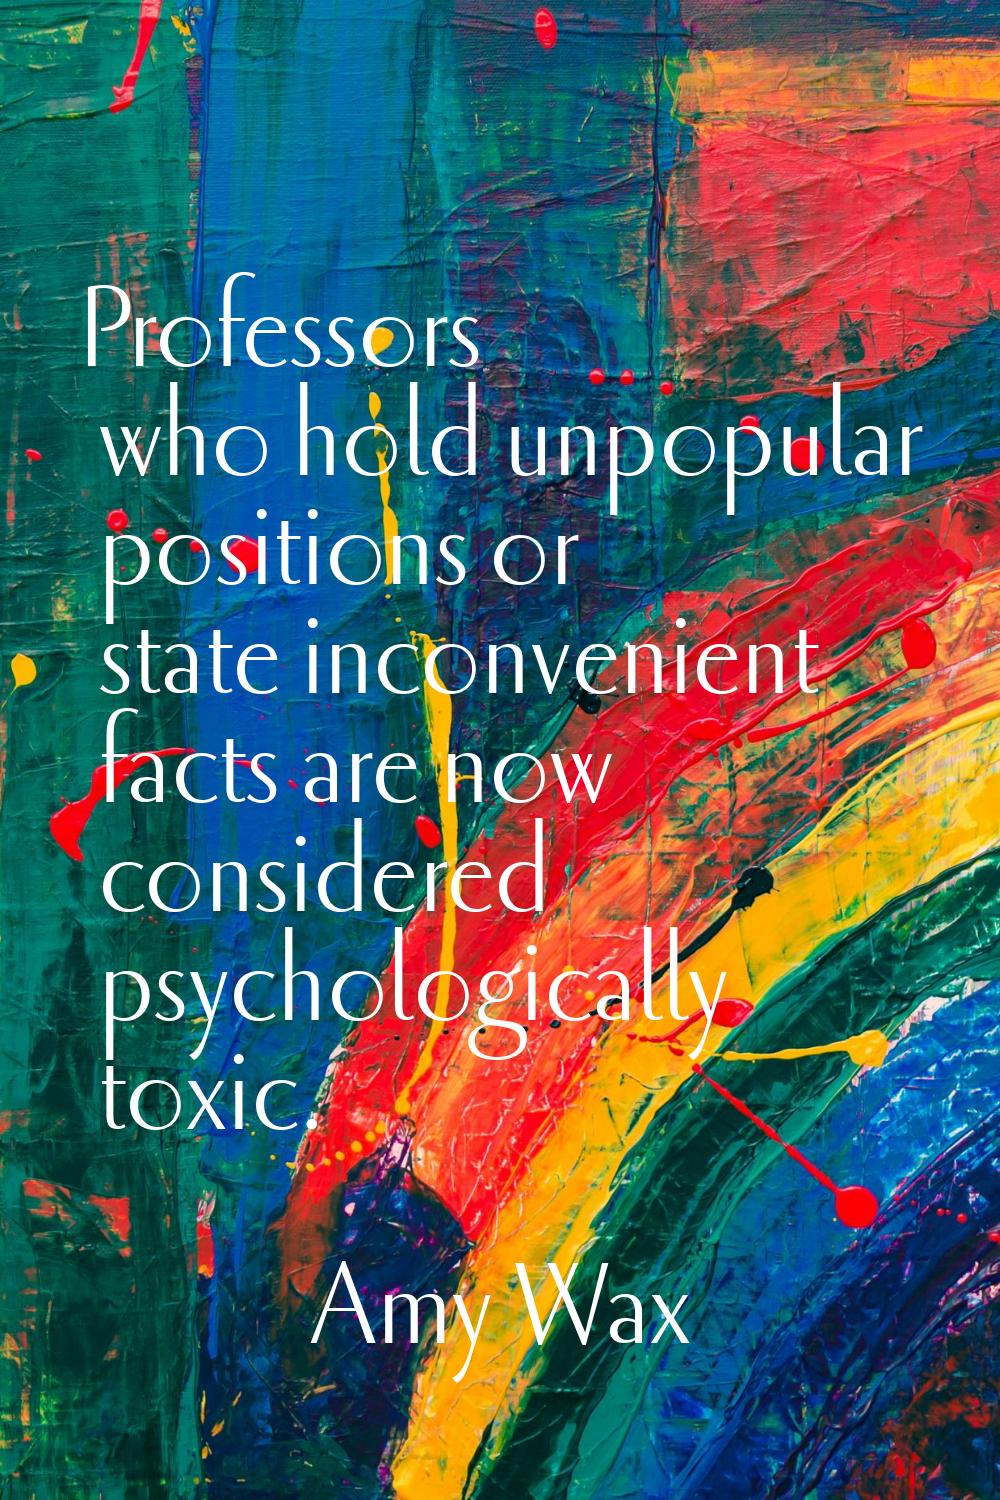 Professors who hold unpopular positions or state inconvenient facts are now considered psychologica